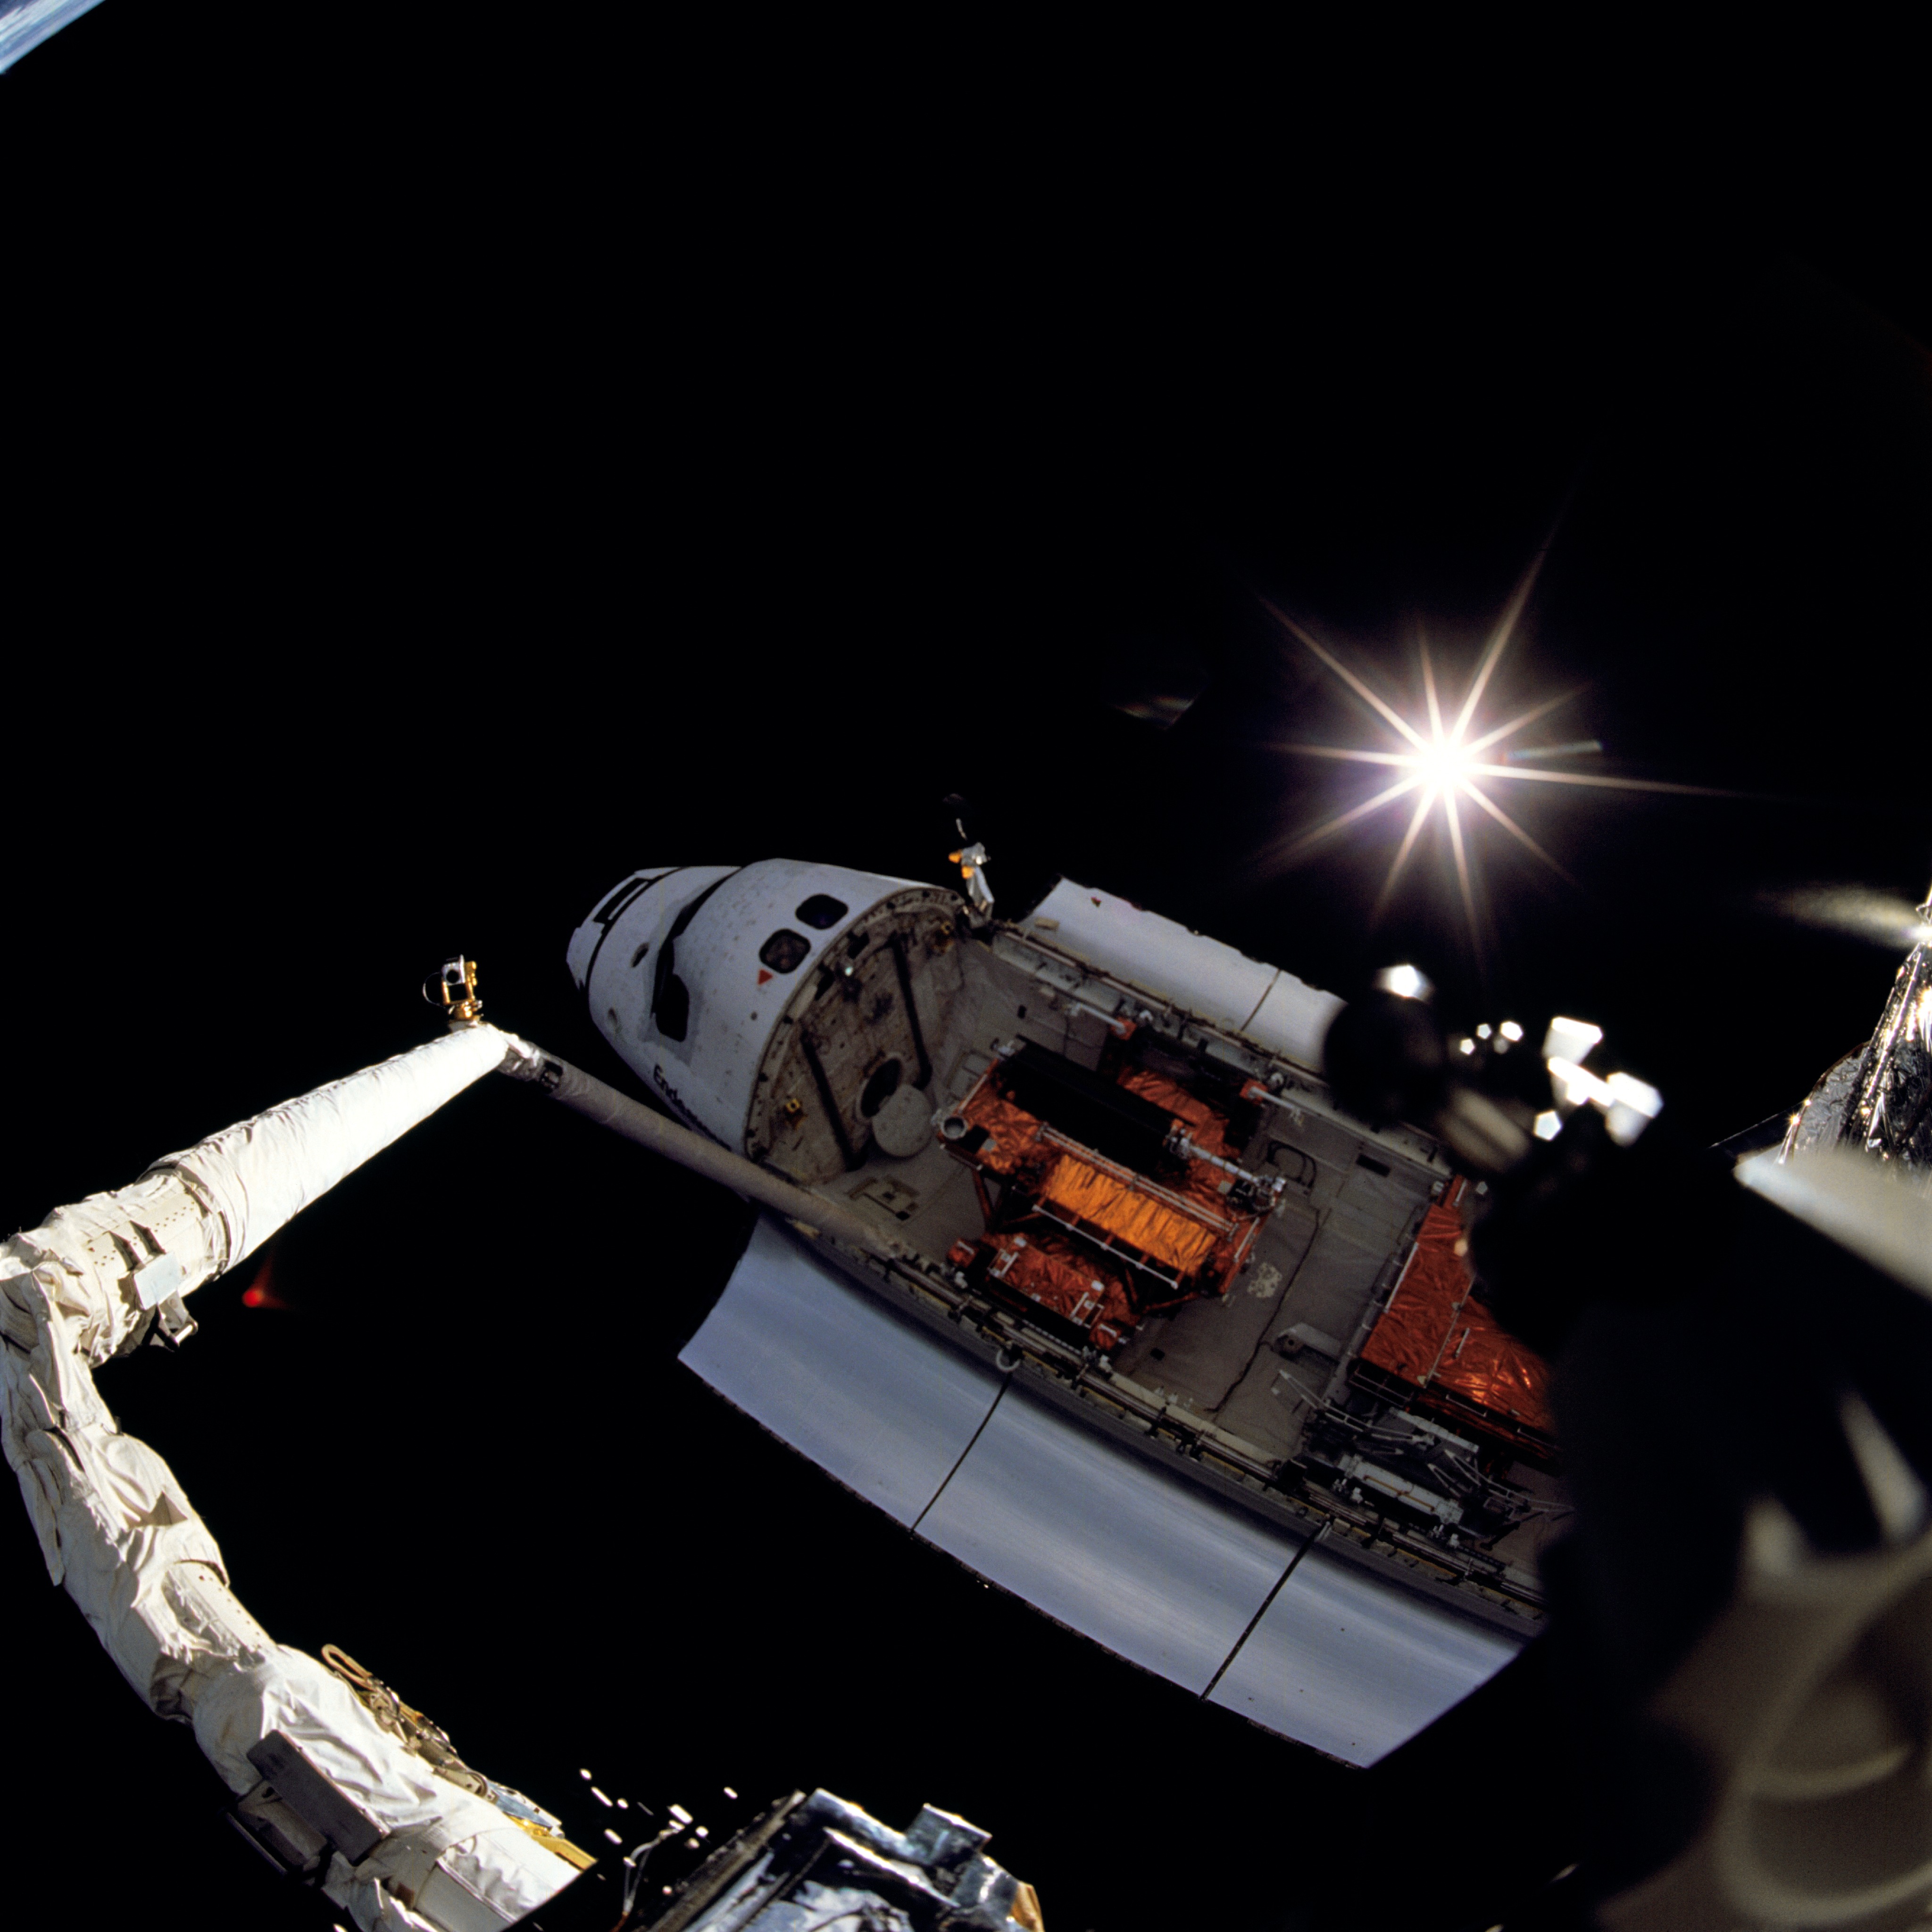 A photo of the Shuttle from above with a rayed sun effect in the background